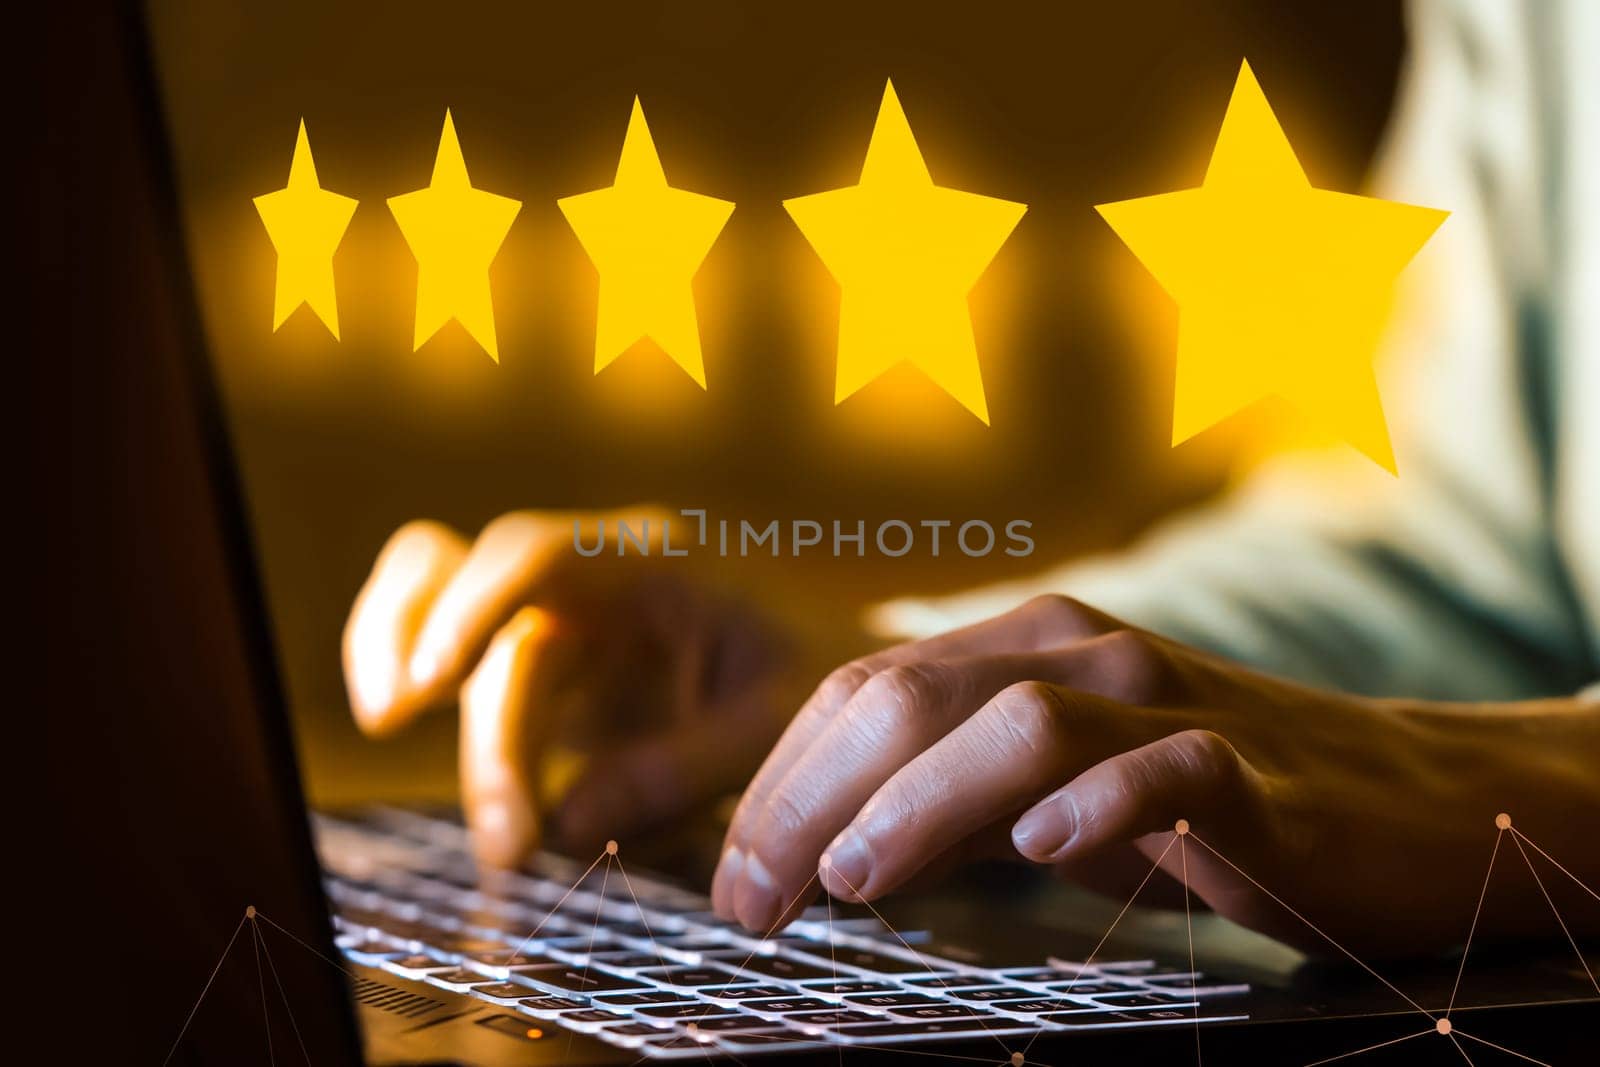 Female hands are typing on the laptop keyboard, close-up view. The person leaves a five-star review for the service, hotel, restaurant, the impression of buying online.